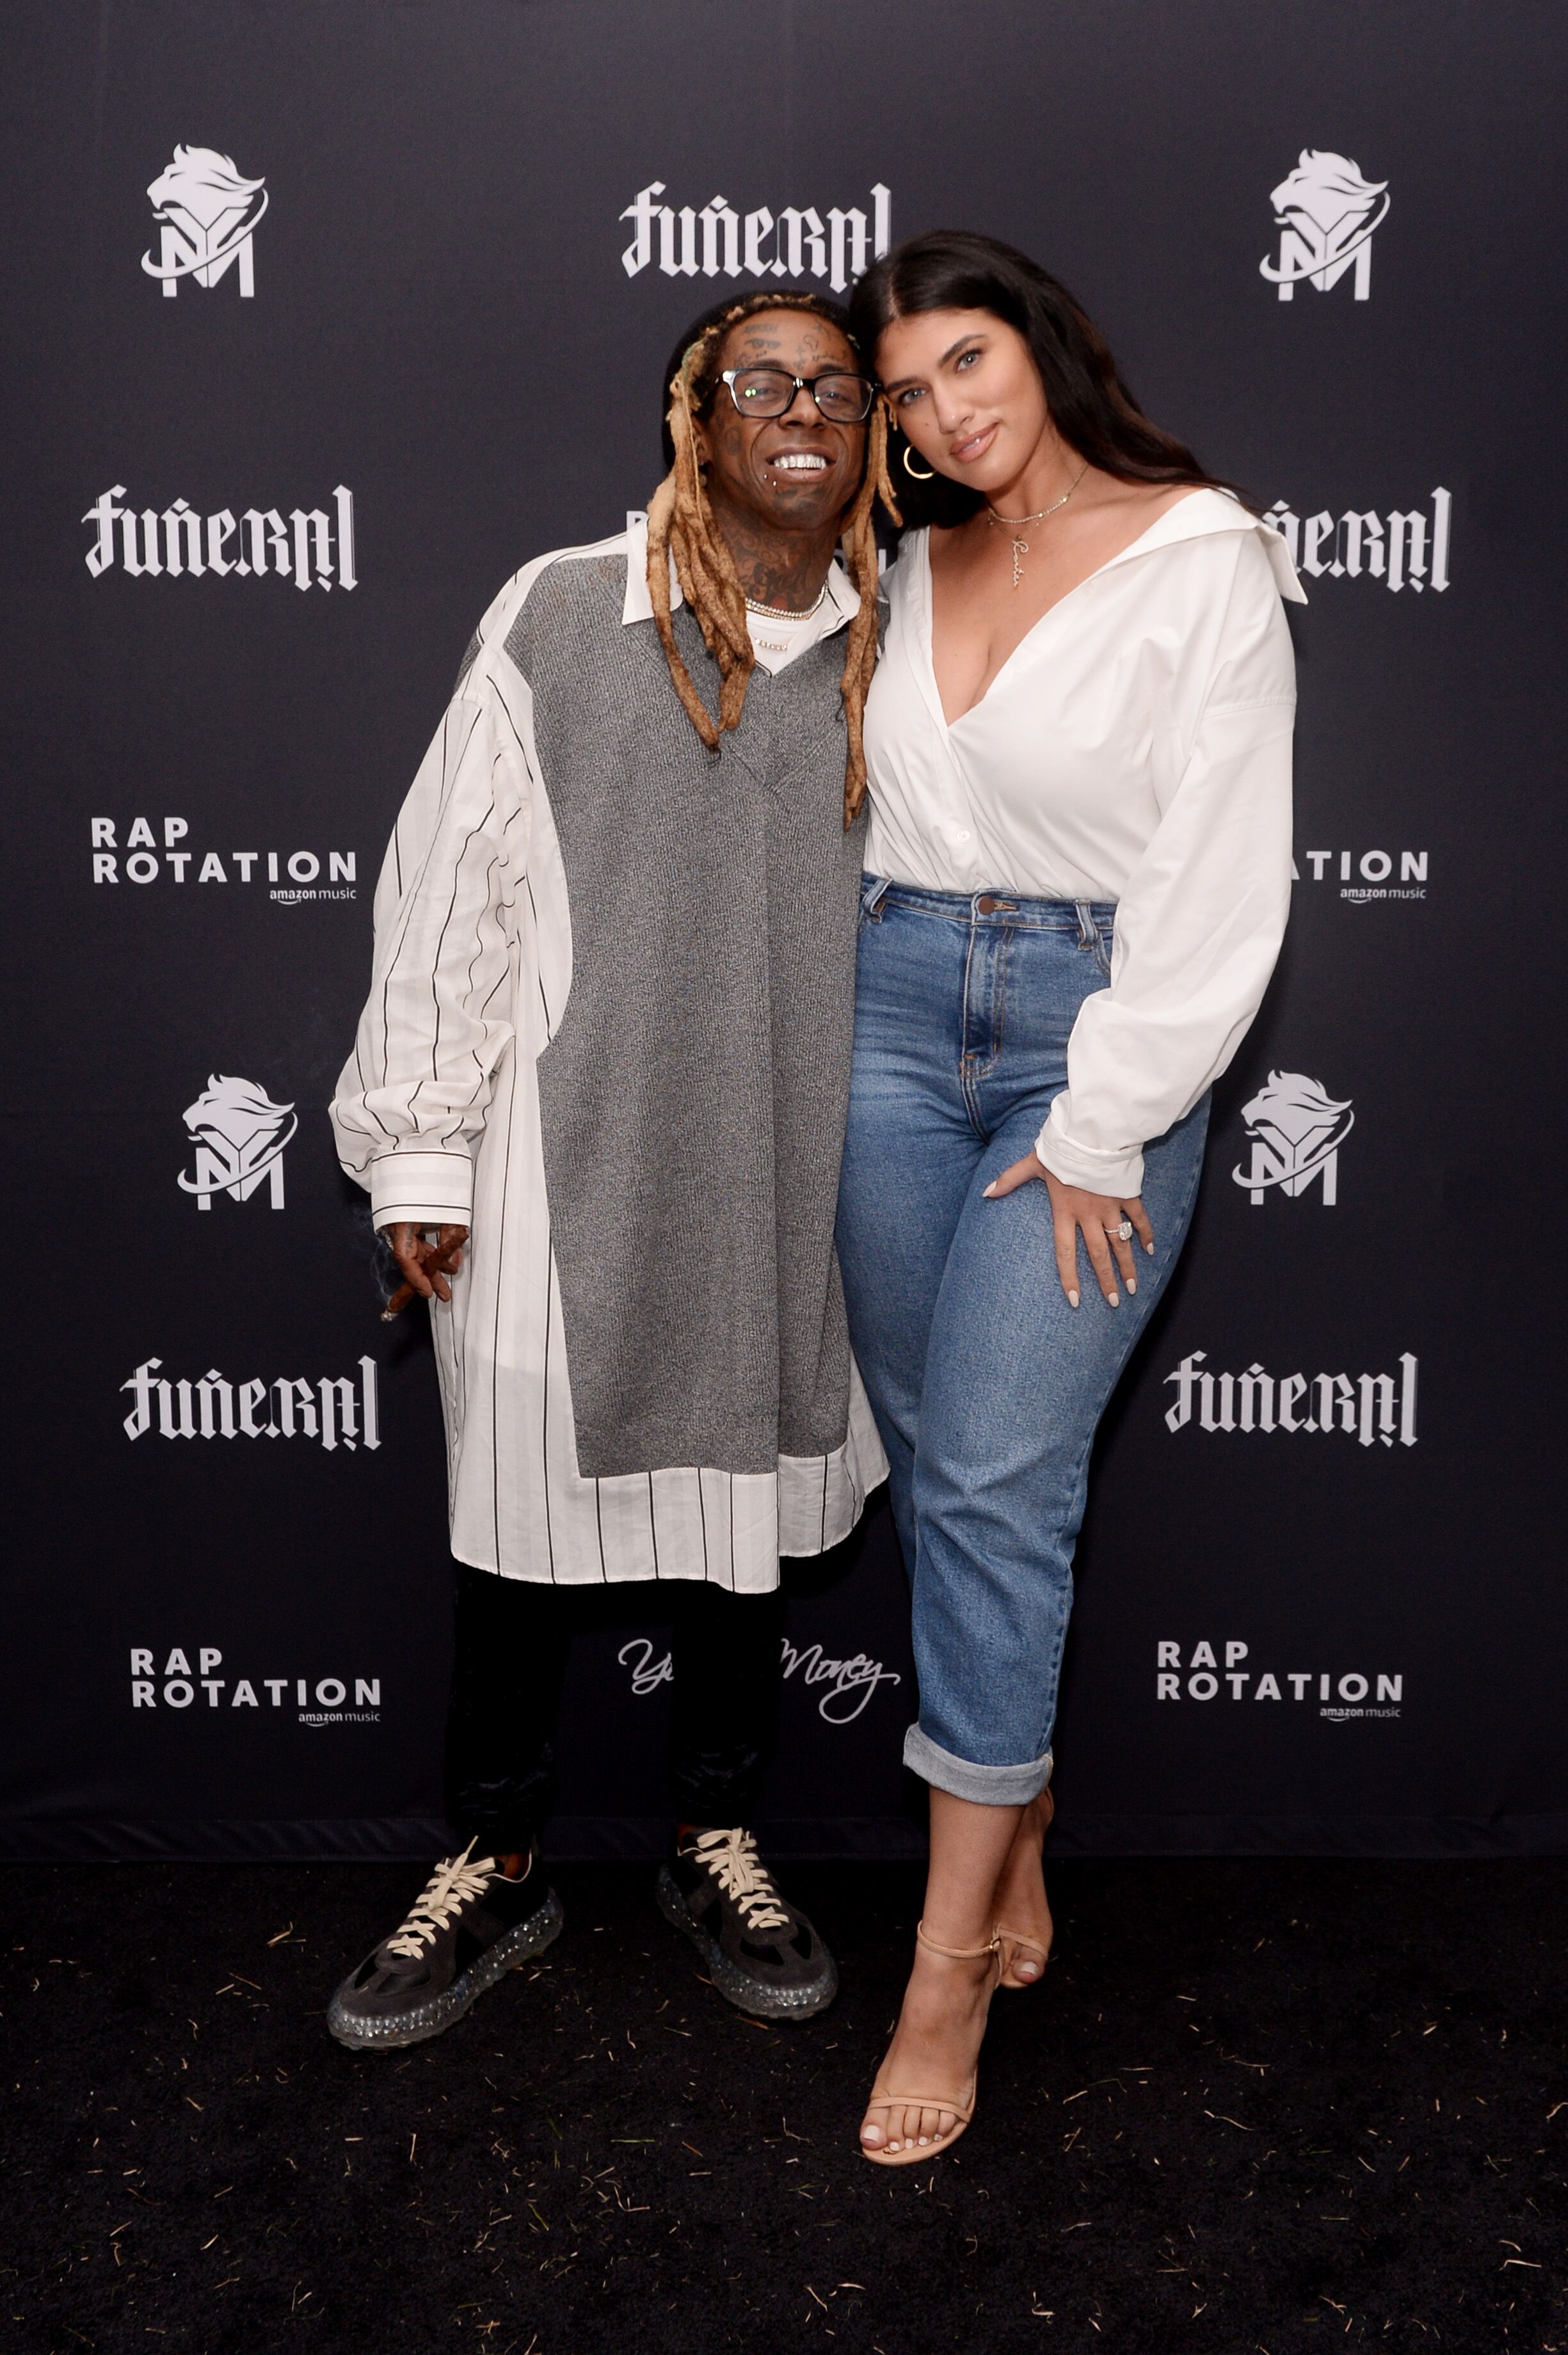 Lil Wayne and La'Tecia attend the "Funeral" Album Launch Party | Source: Getty Images/GlobalImagesUkraine